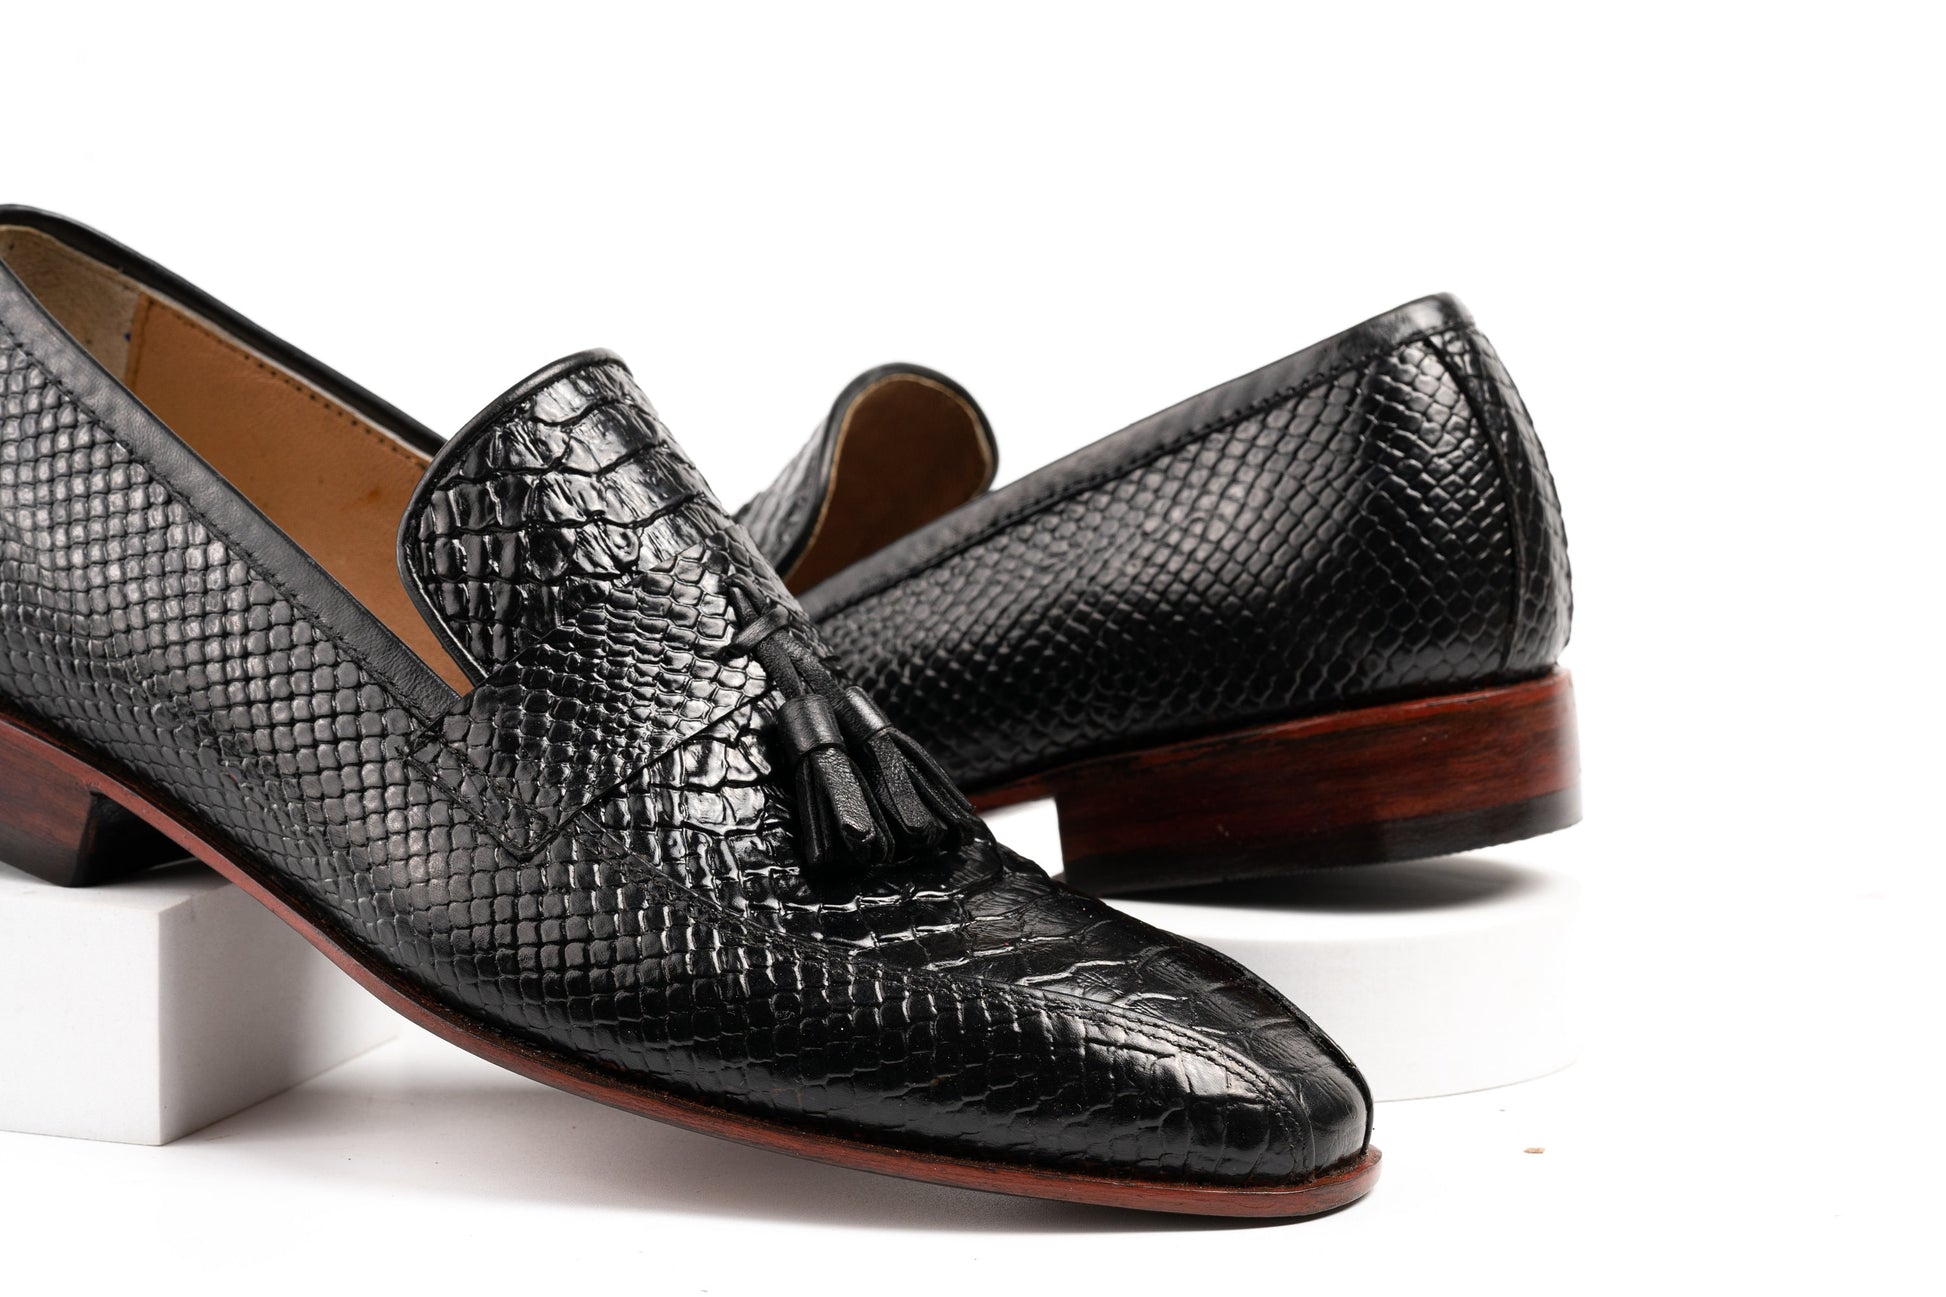 Black Tussle lizard pattern leather Loafer Perfect Adult gift, Men's Dress Casual Party Loafer Woozy Store